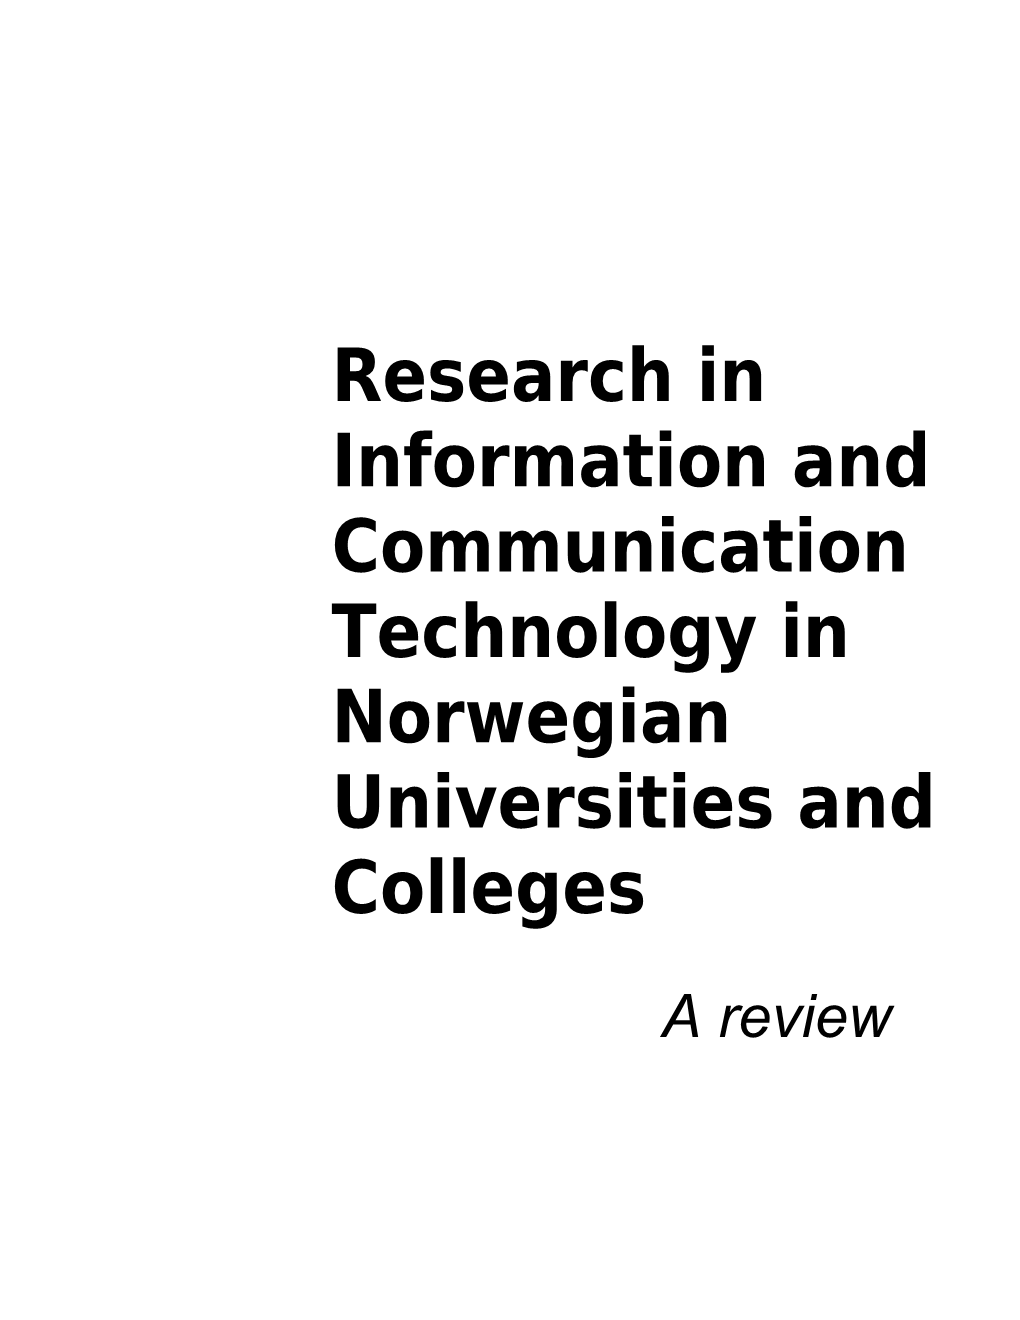 Research in Information and Communication Technology in Norwegian Universities and Colleges